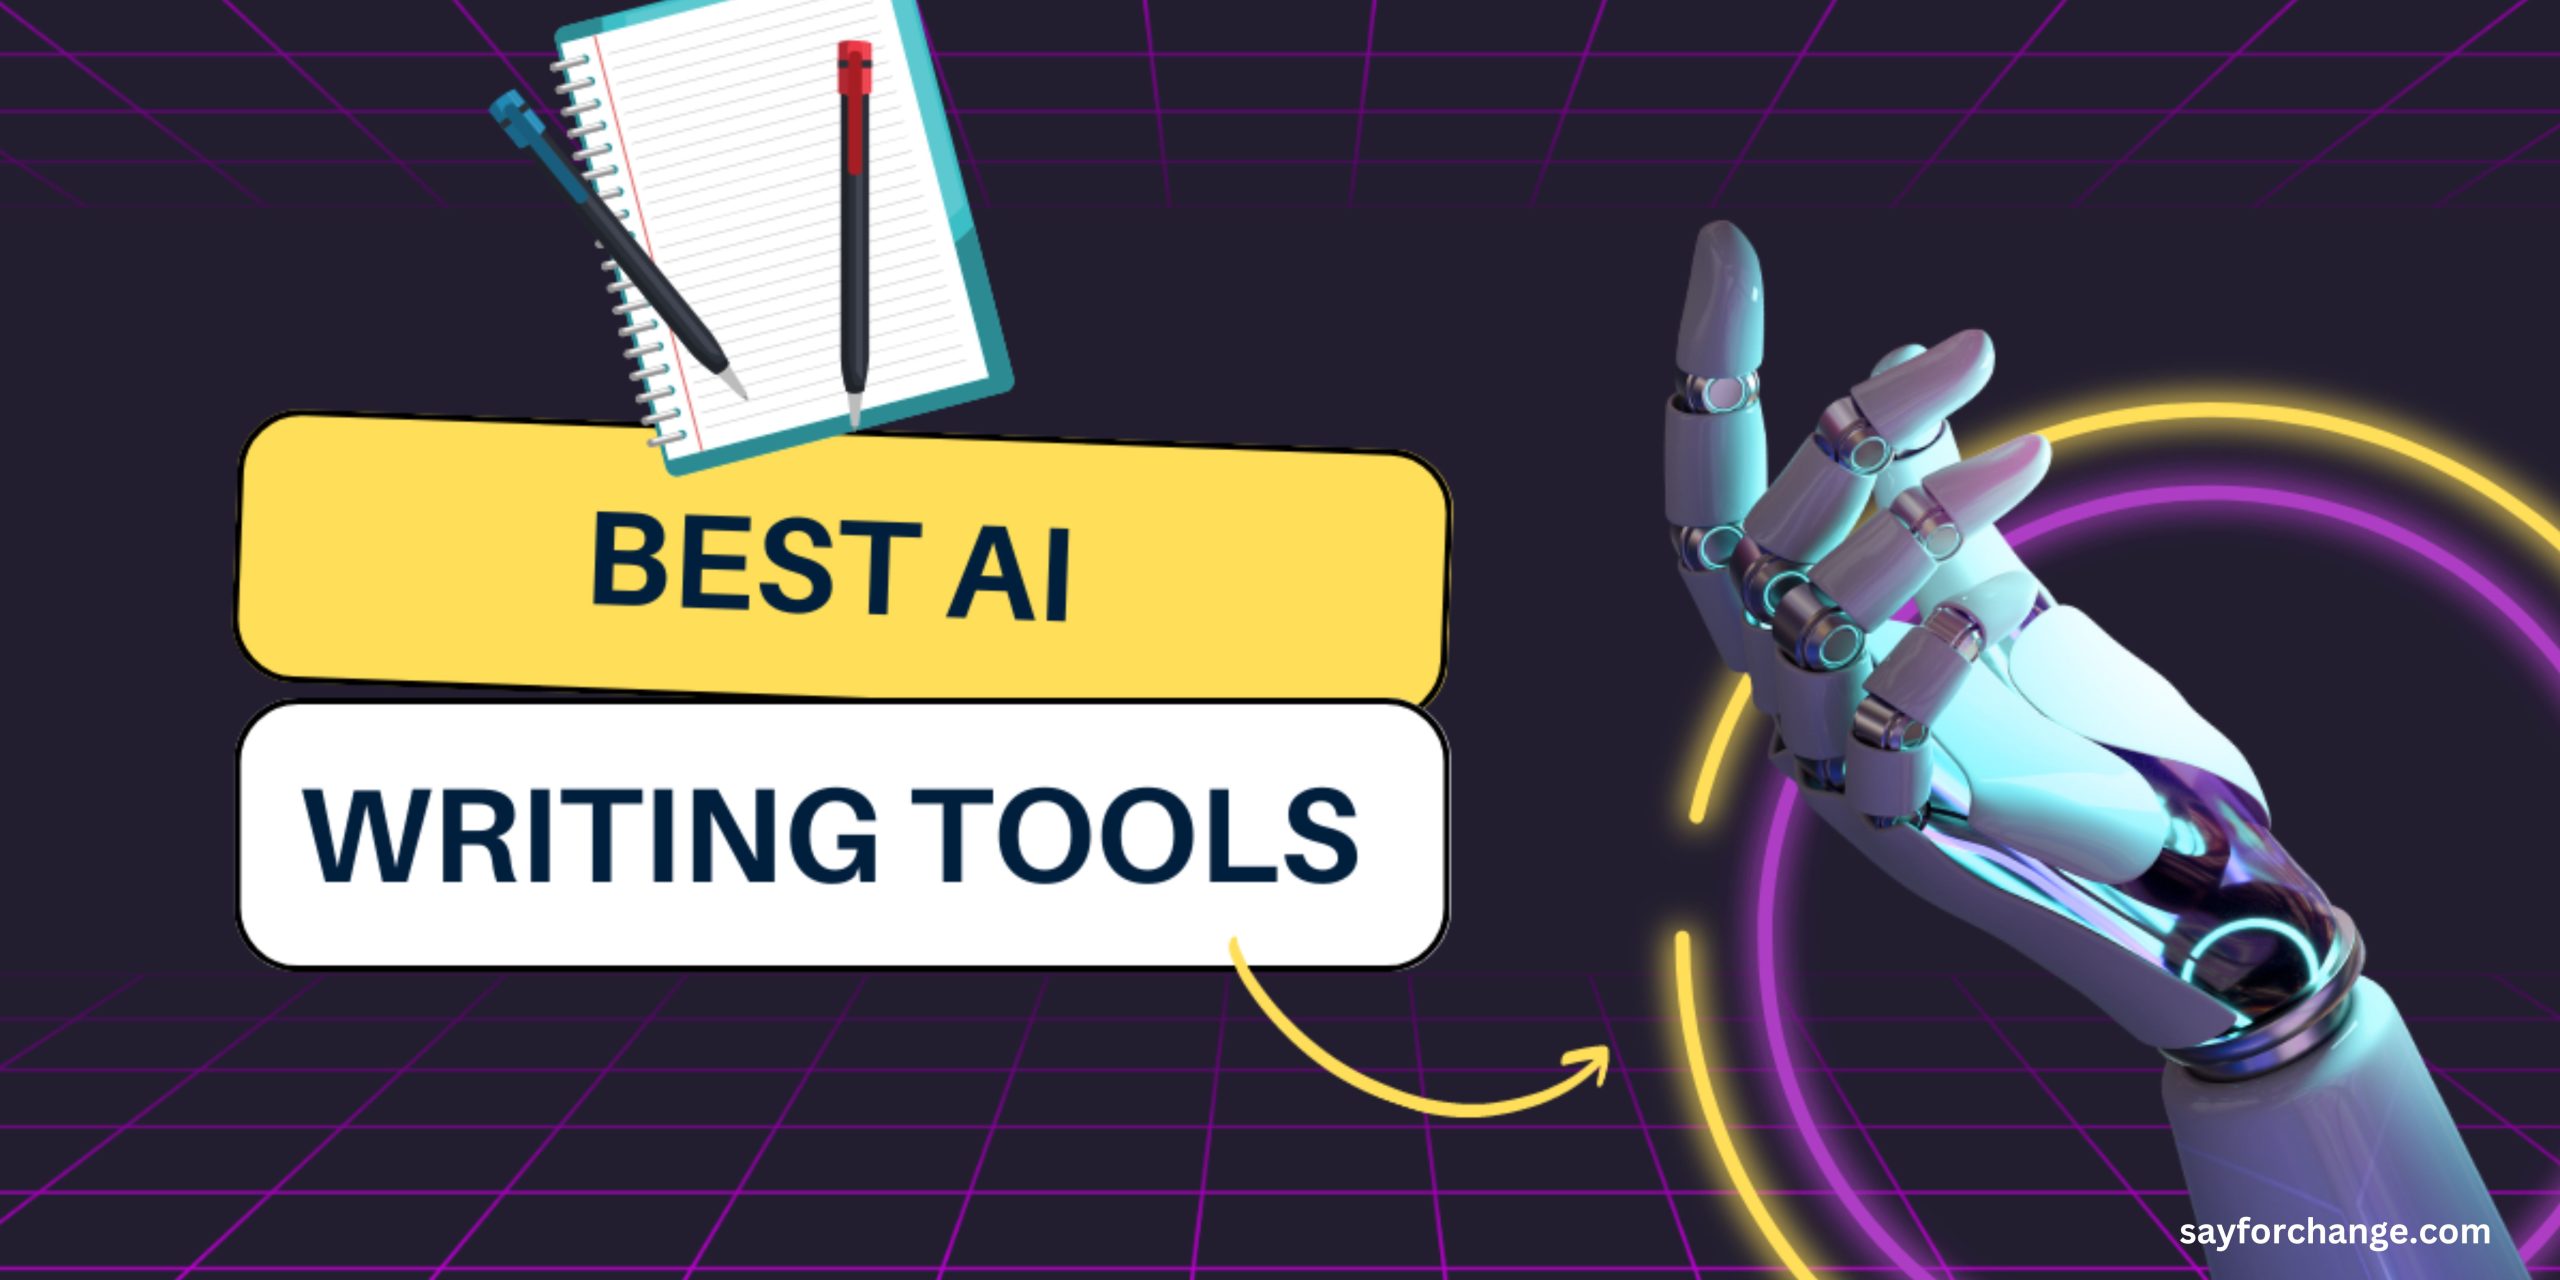 10 Best AI Writing Tools for Faster Content Development